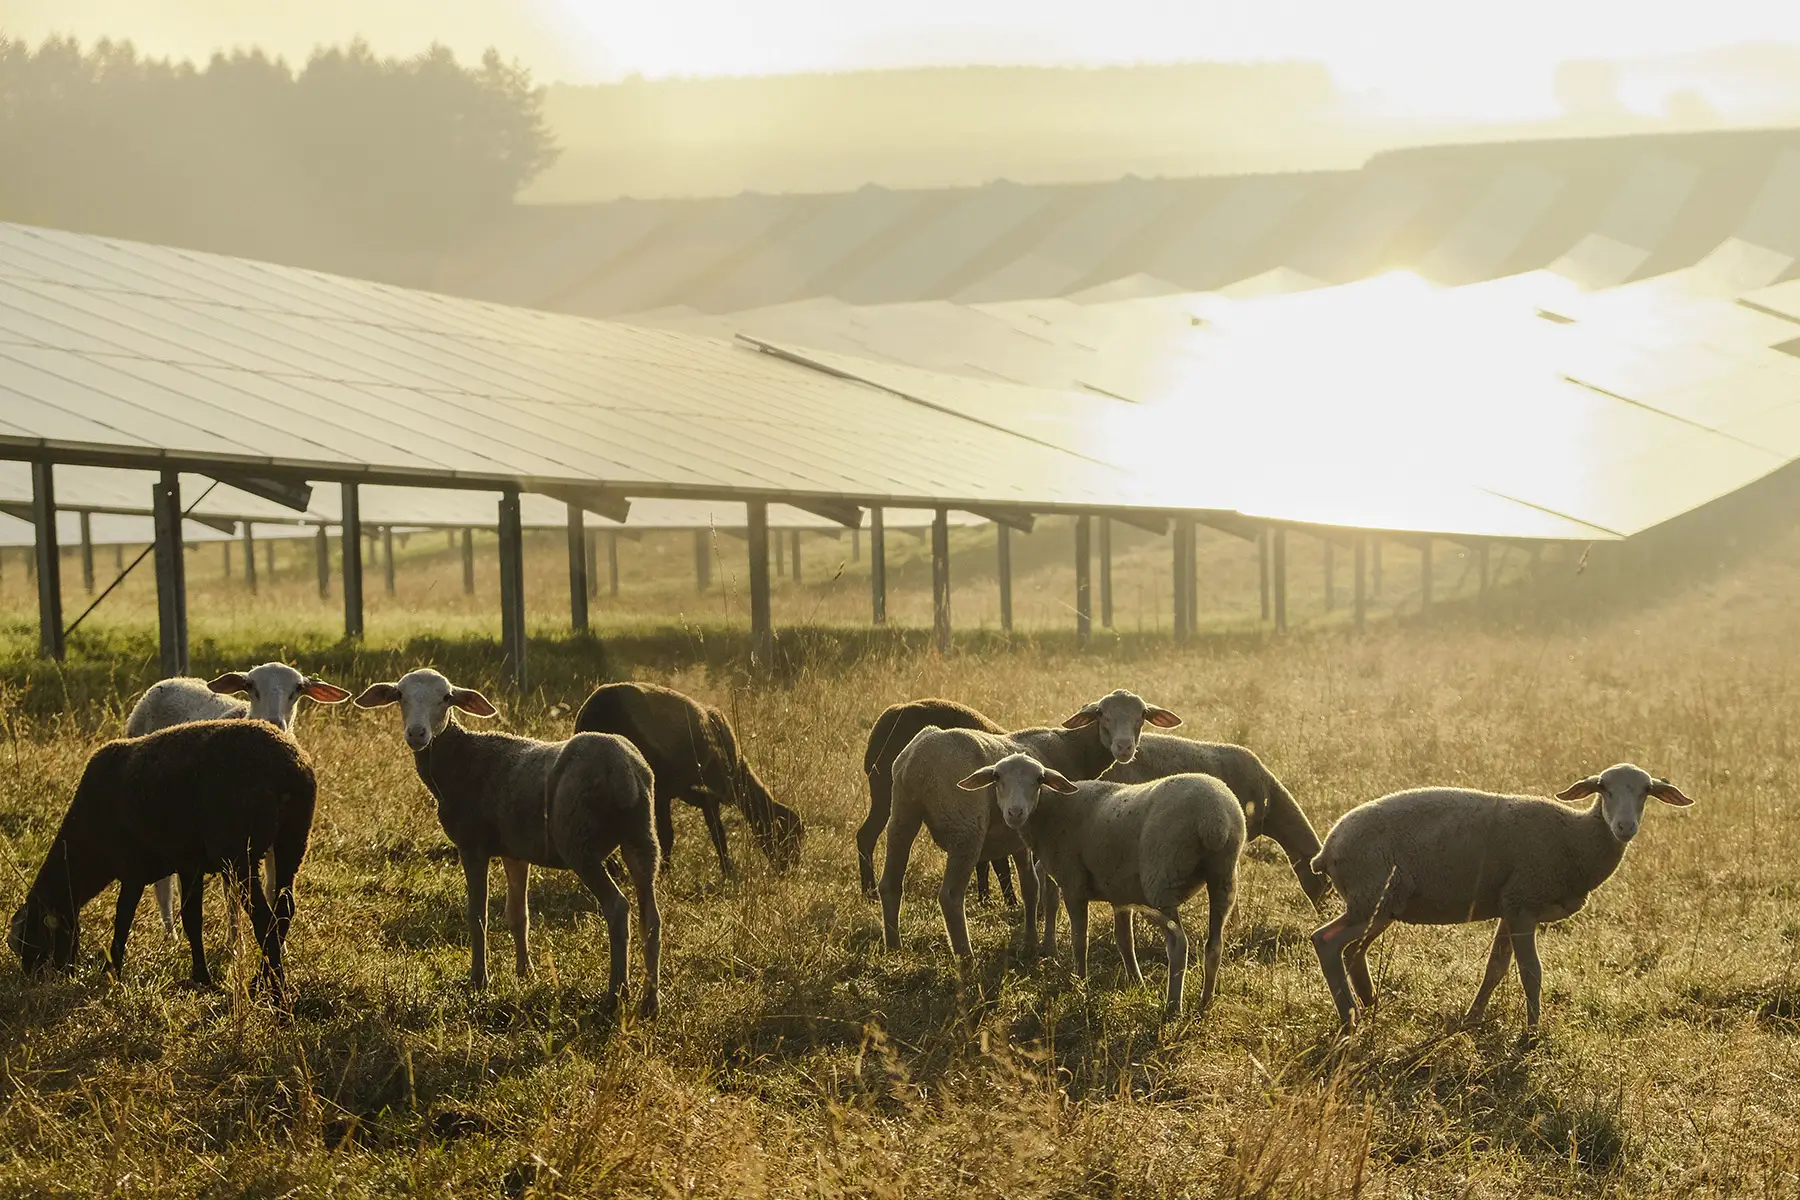 Field of solar panels surrounded by grazing sheep